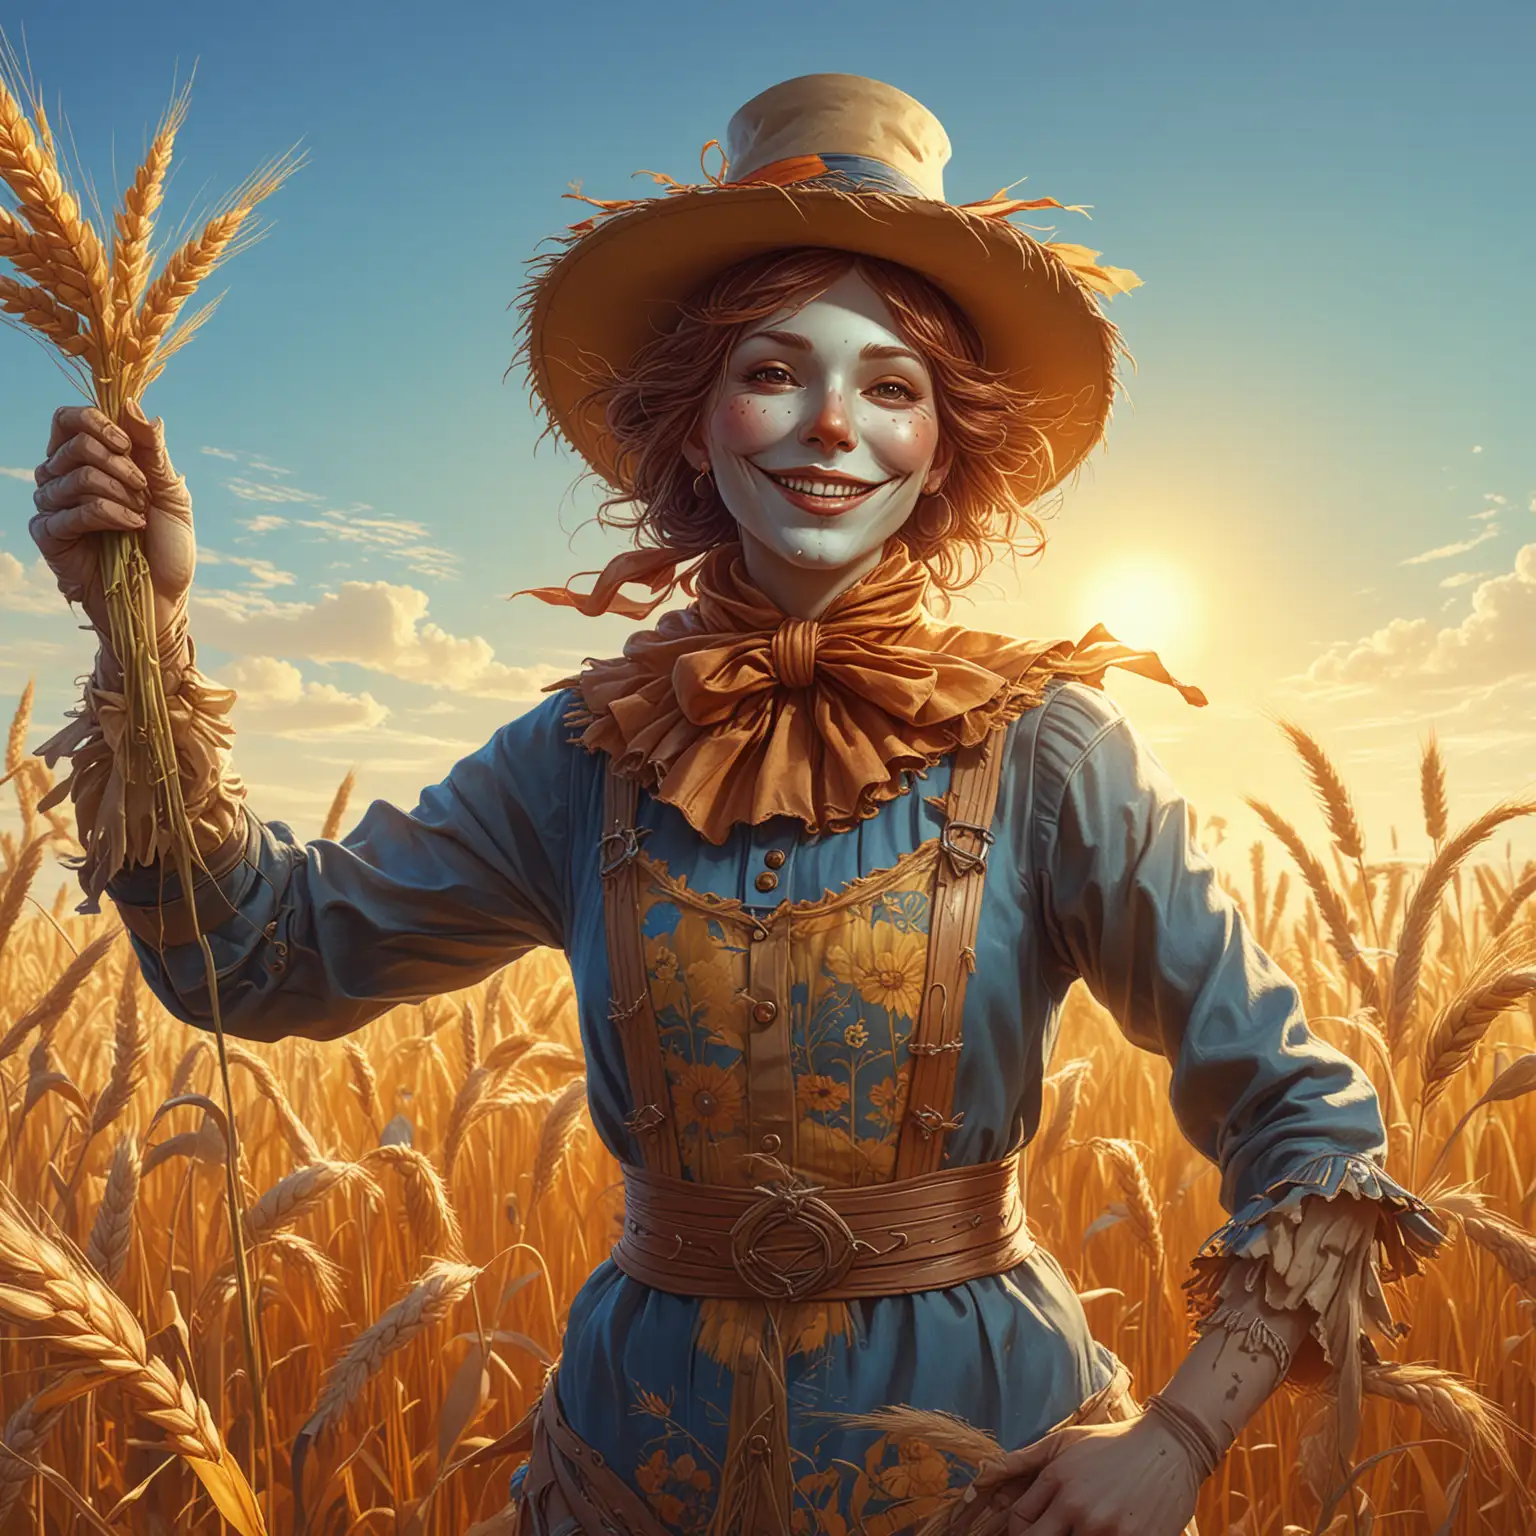 Outstanding scarecrow at a field, Cheerful scarecrow with award, Field of wheat, Blue sky, Happy sun, Digital illustration, Bright and colorful, Realistic with a touch of fantasy, Highly detailed and sharp focus, Warm and golden lighting, by James Jean and Alphonse Mucha, Artstation